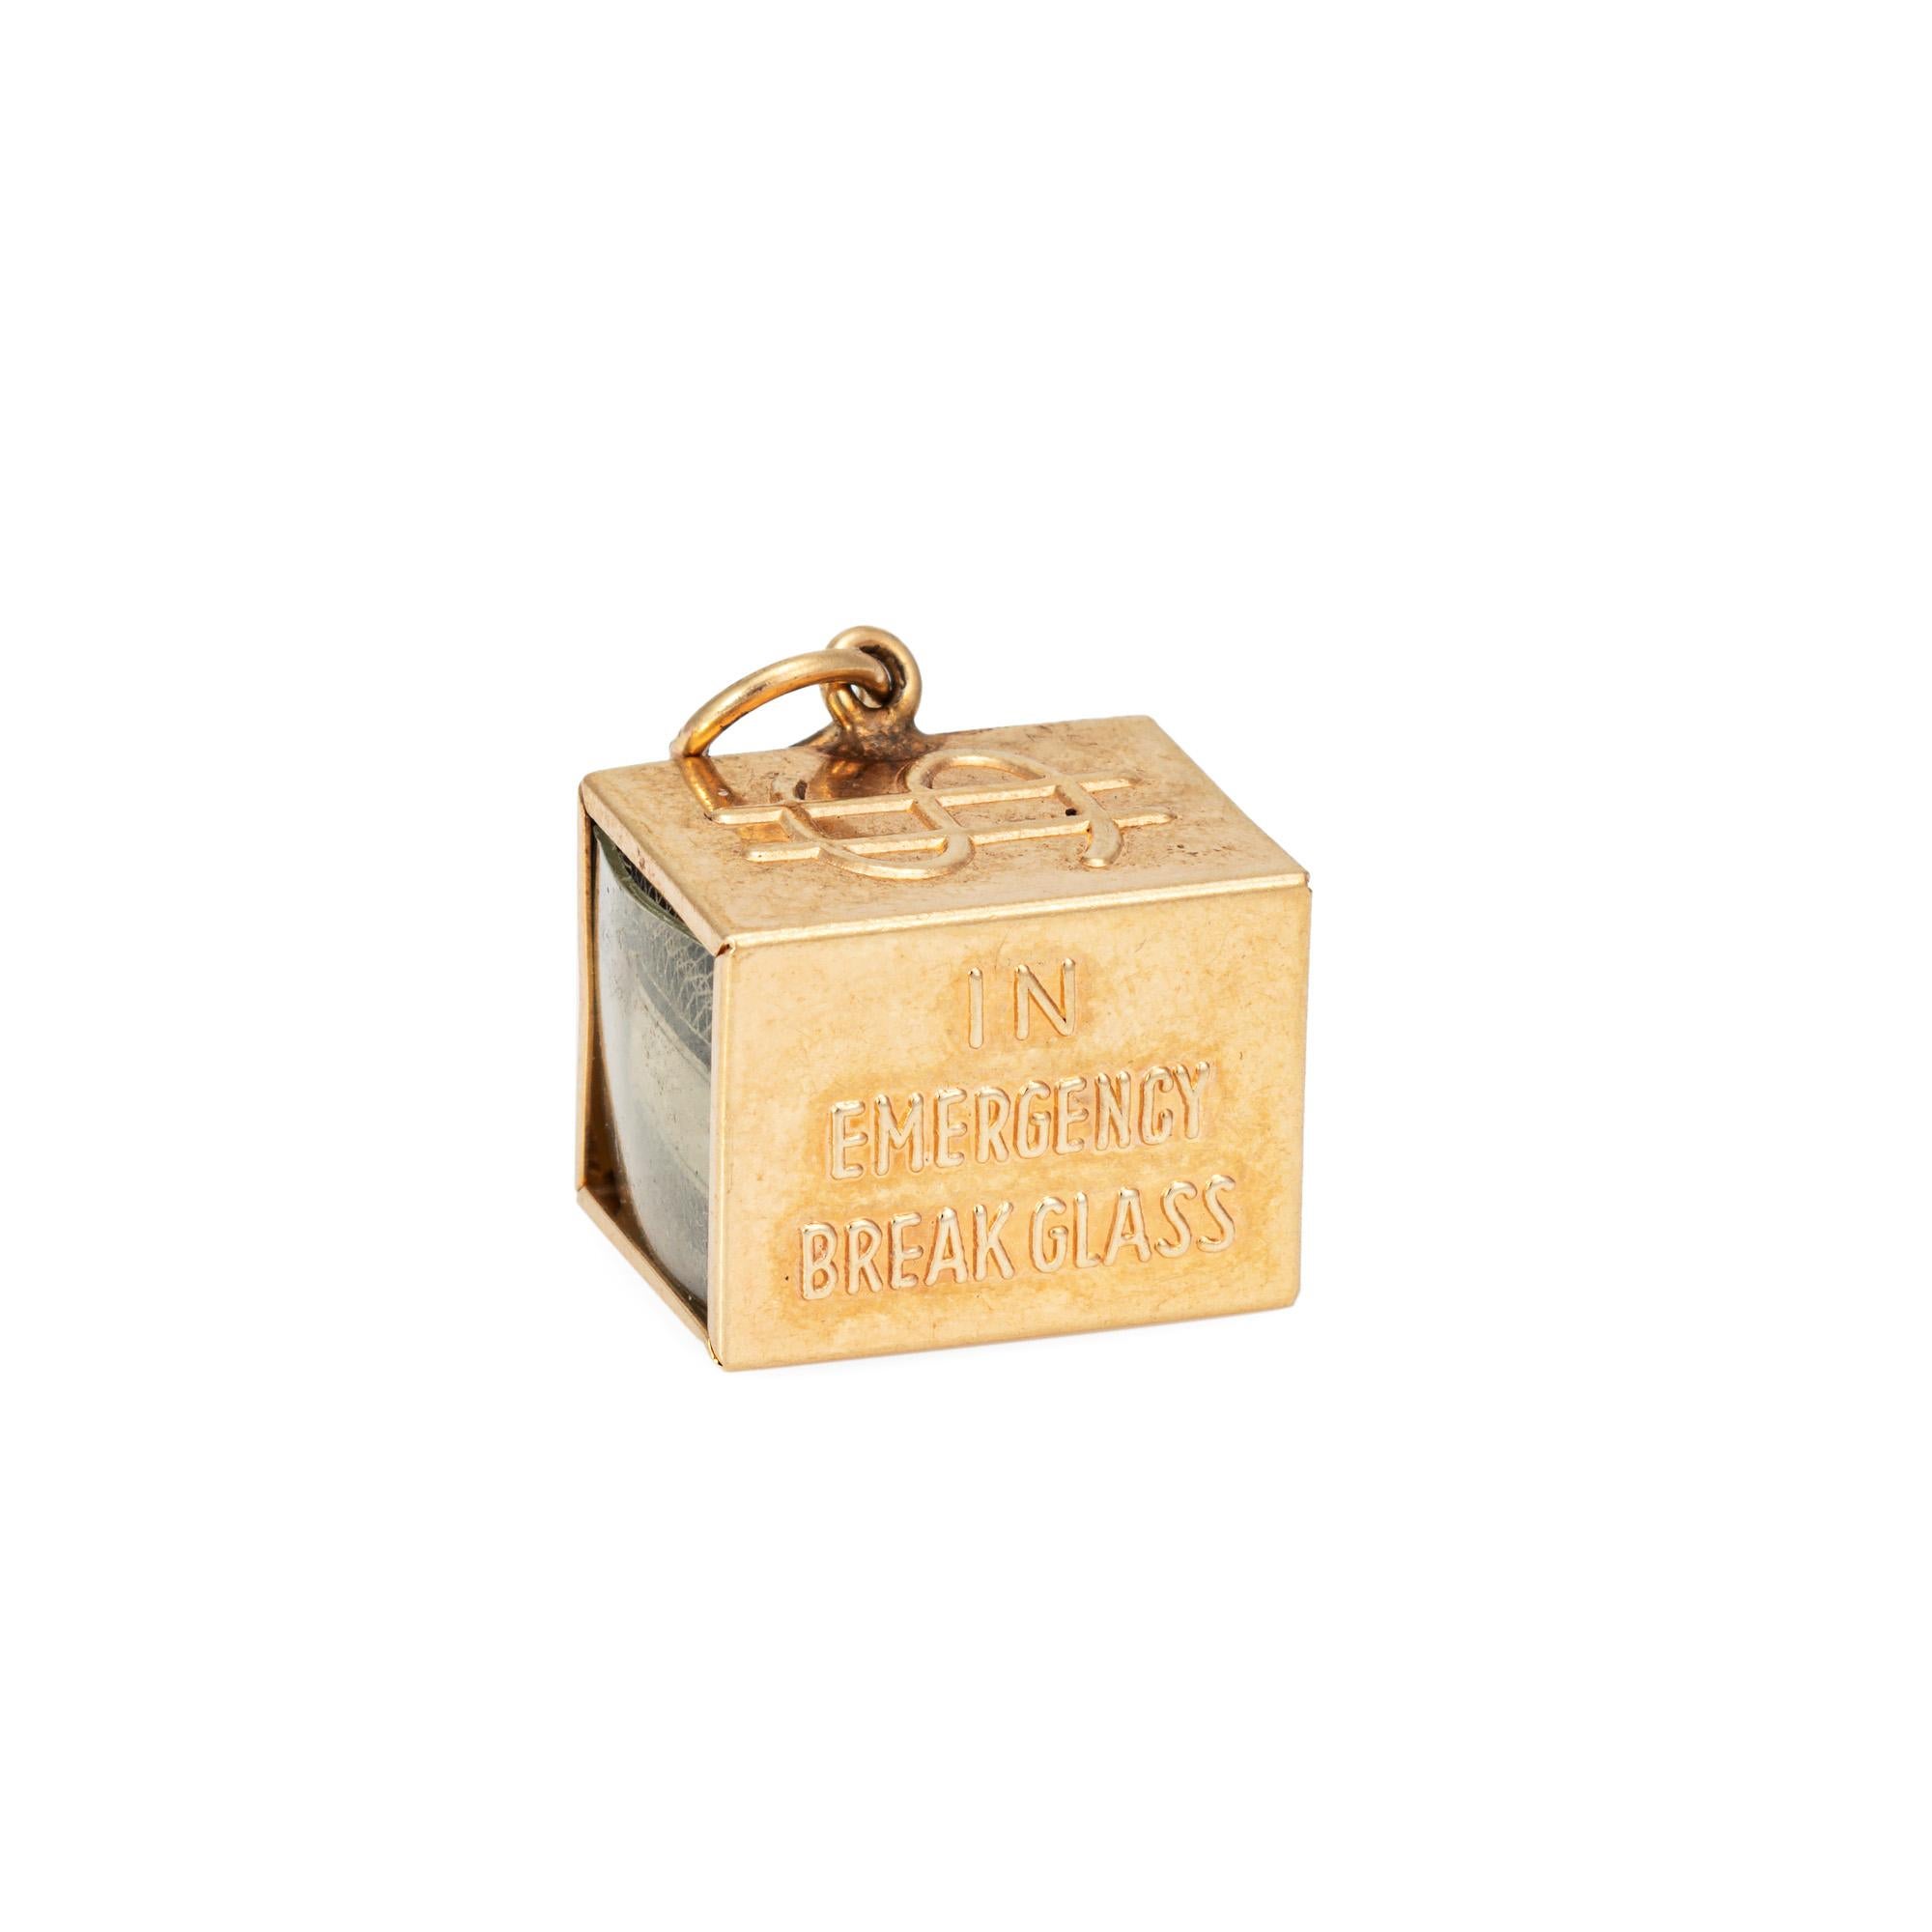 Fun vintage 'Mad Money' charm crafted in 14k yellow gold (circa 1940s to 1950s).  

The four sided charm features a dollar bill folded and placed in the center of the charm, with 